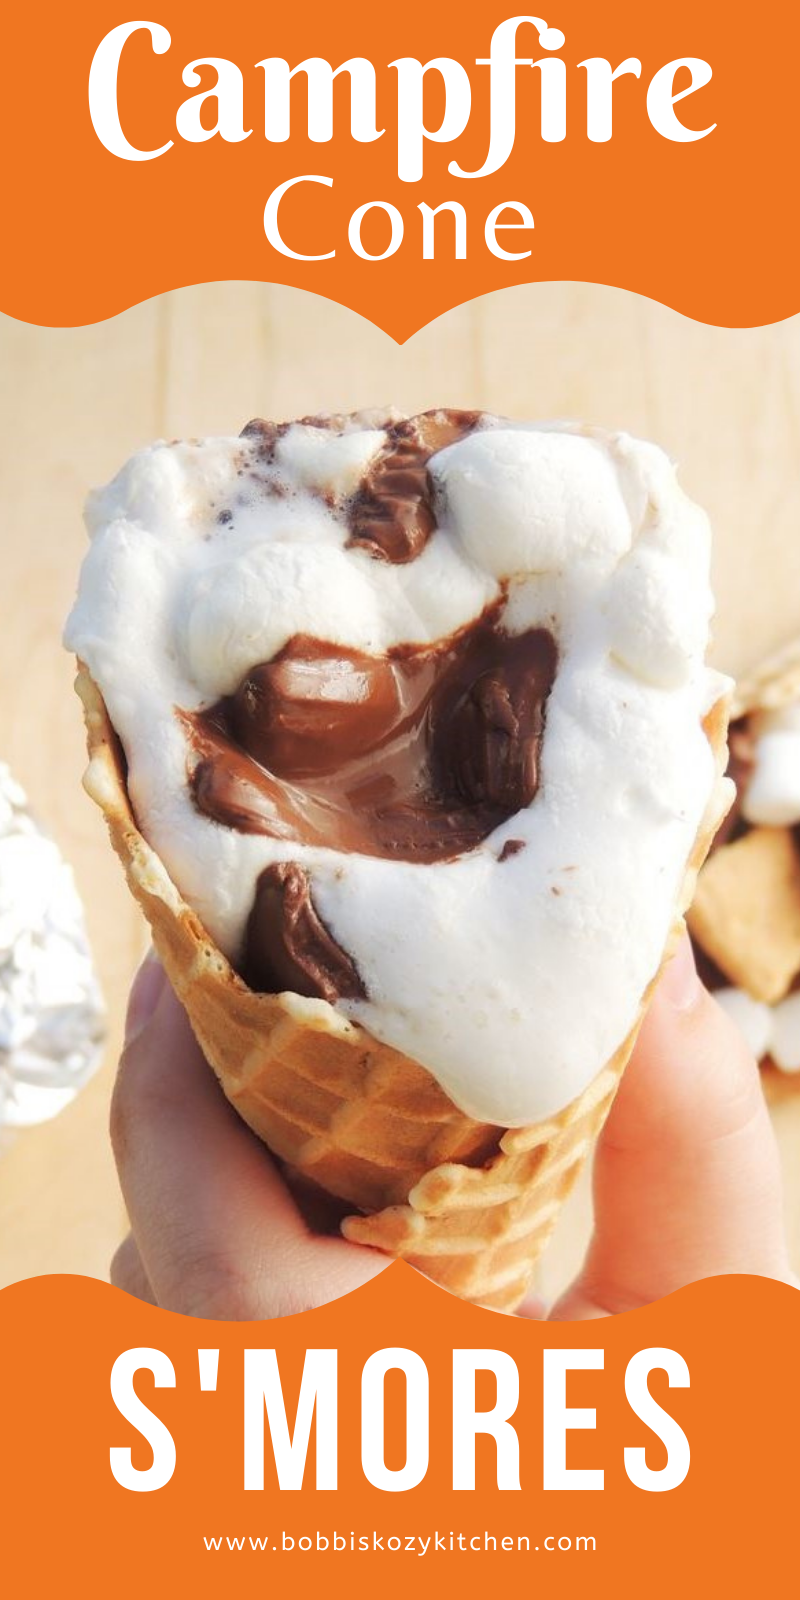 Campfire Cone S'mores - These Campfire Cone S'mores are a tasty variation on the traditional s'mores recipe and are a fun way to enjoy your favorite campfire treat! #dessert #chocolate #Marshmallow #Marshmellow #graham #cone #smores #camping #campfire #grill #recipe